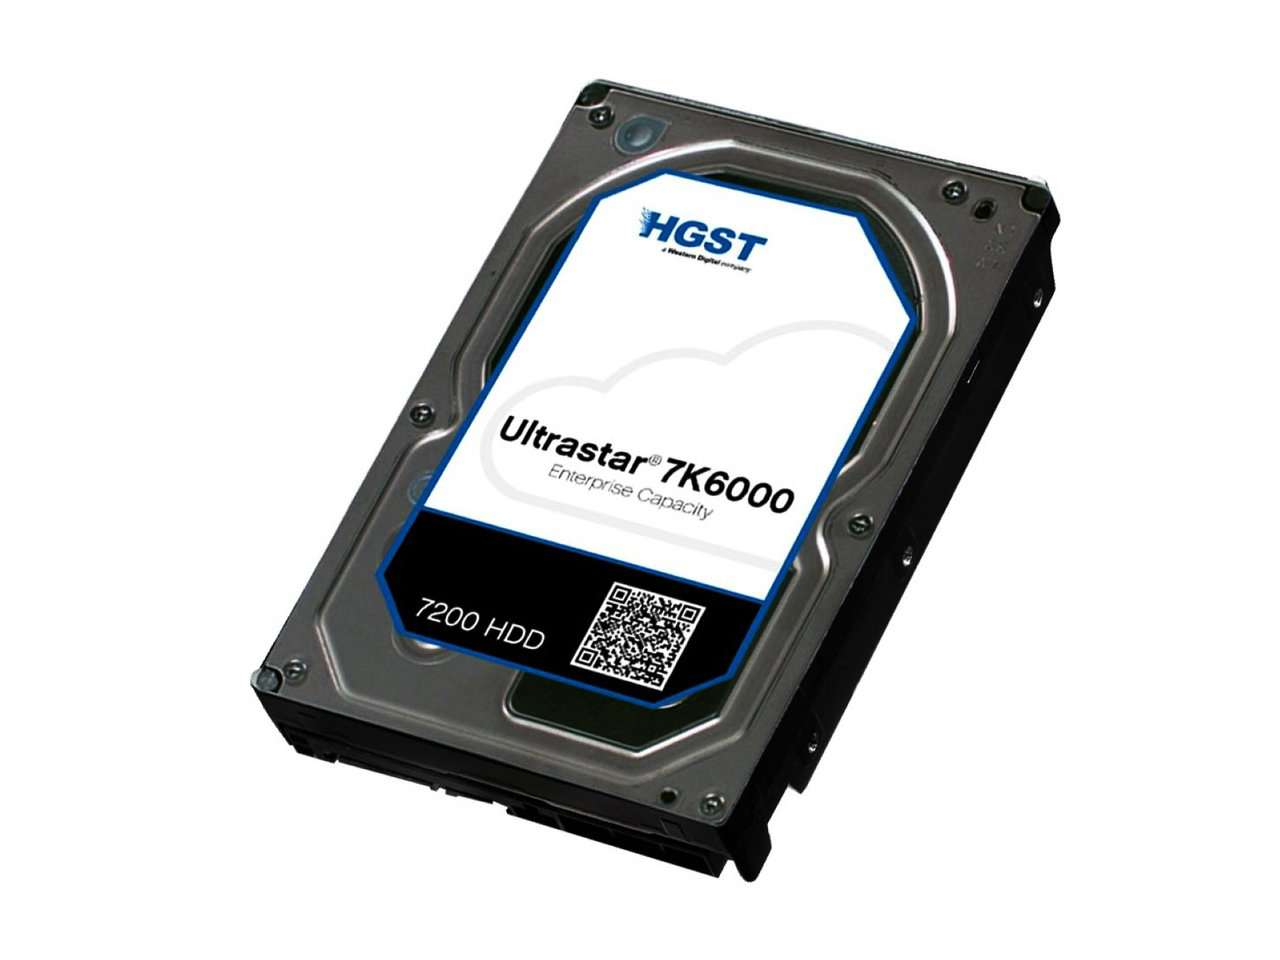 HGST Ultrastar 7K6000 0F22801  HUS726060AL5211 6TB 7.2K RPM SAS 12Gb/s 512e 128MB Cache 3.5" TCG Manufacturer Recertified HDD